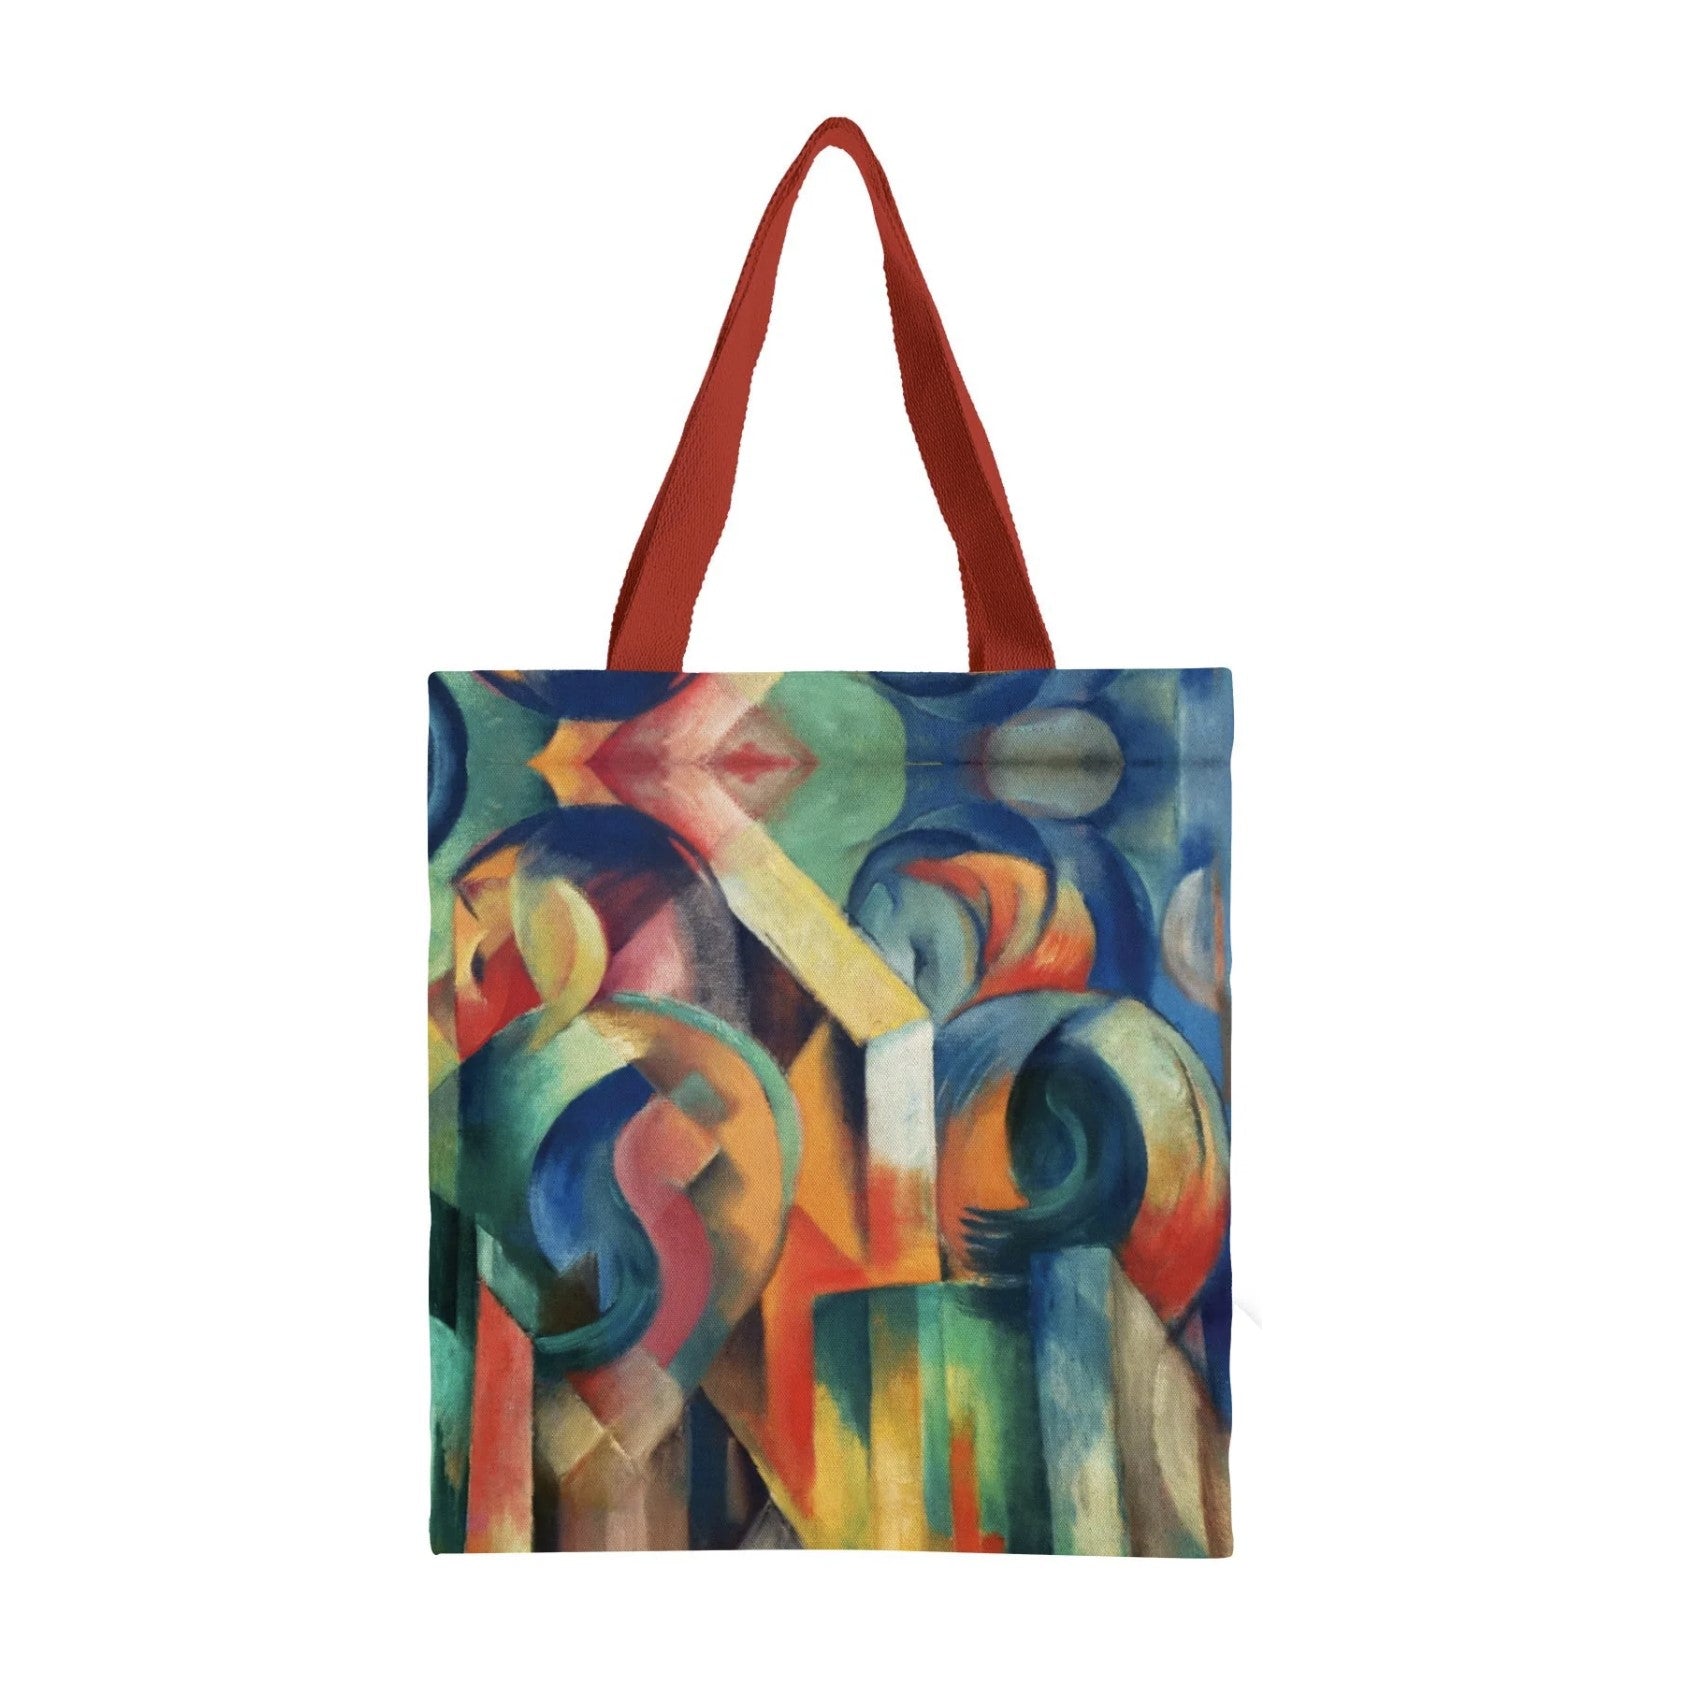 Fine Art Canvas Tote,     "Stables" by Franz Marc